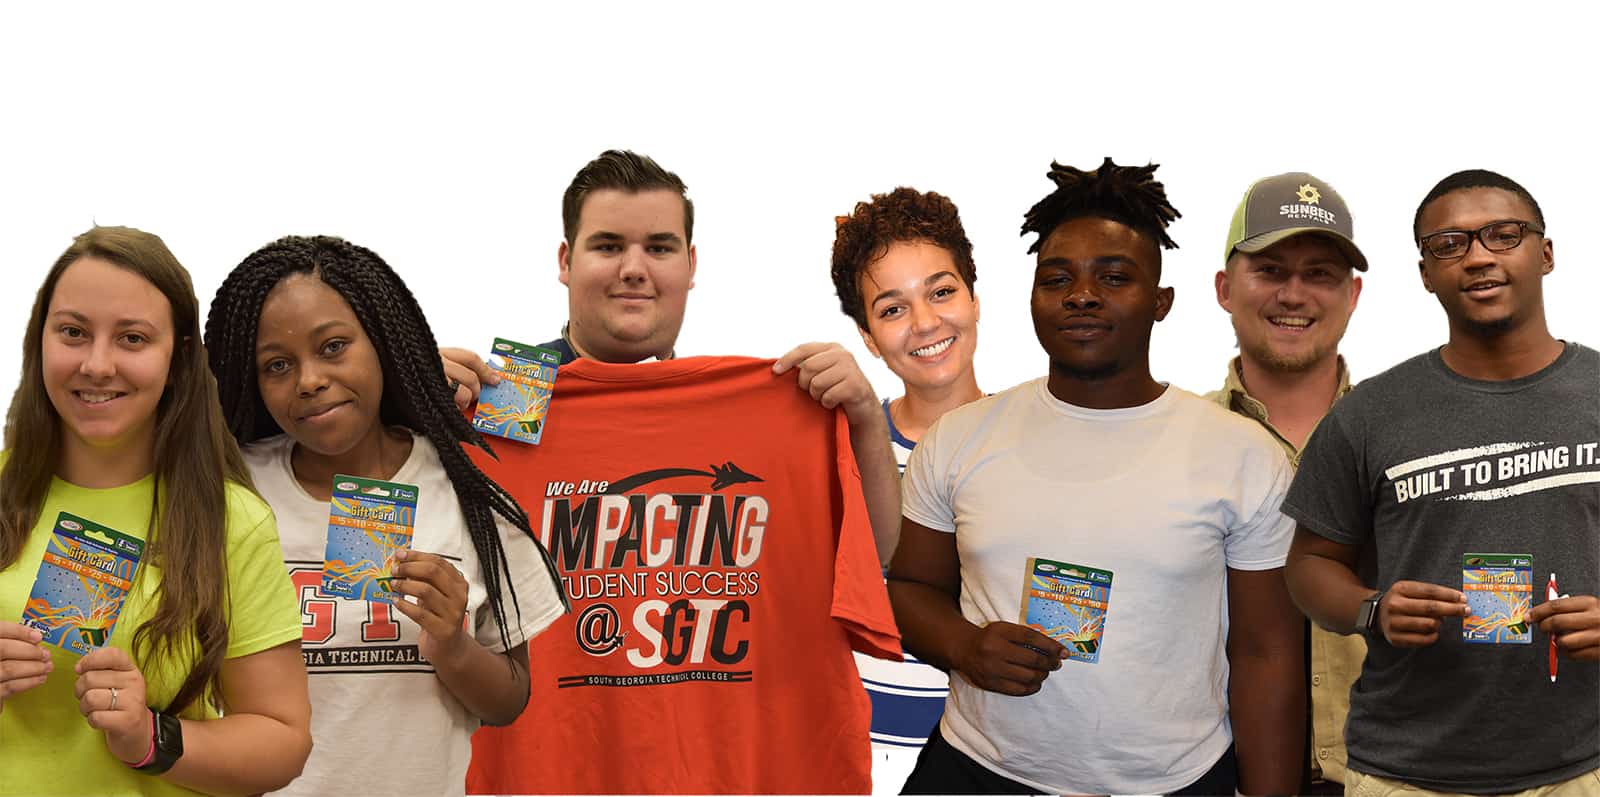 Shown above are seven of the students who were presented with Charles Eames Travel Fund gas cards this semester. Shown (l to r) are Kylie Nicole McSpadden, Health Care Assisting; Jeterria Boone, Early Childcare; Tison Smith, Precision Machining and Manufacturing; Hawley Steward, Barbering; Jartavious Milledge, Air Conditioning Technology; Christopher Barker, Welding and Joining; and Frederick Lee Gear, Automotive Technology.